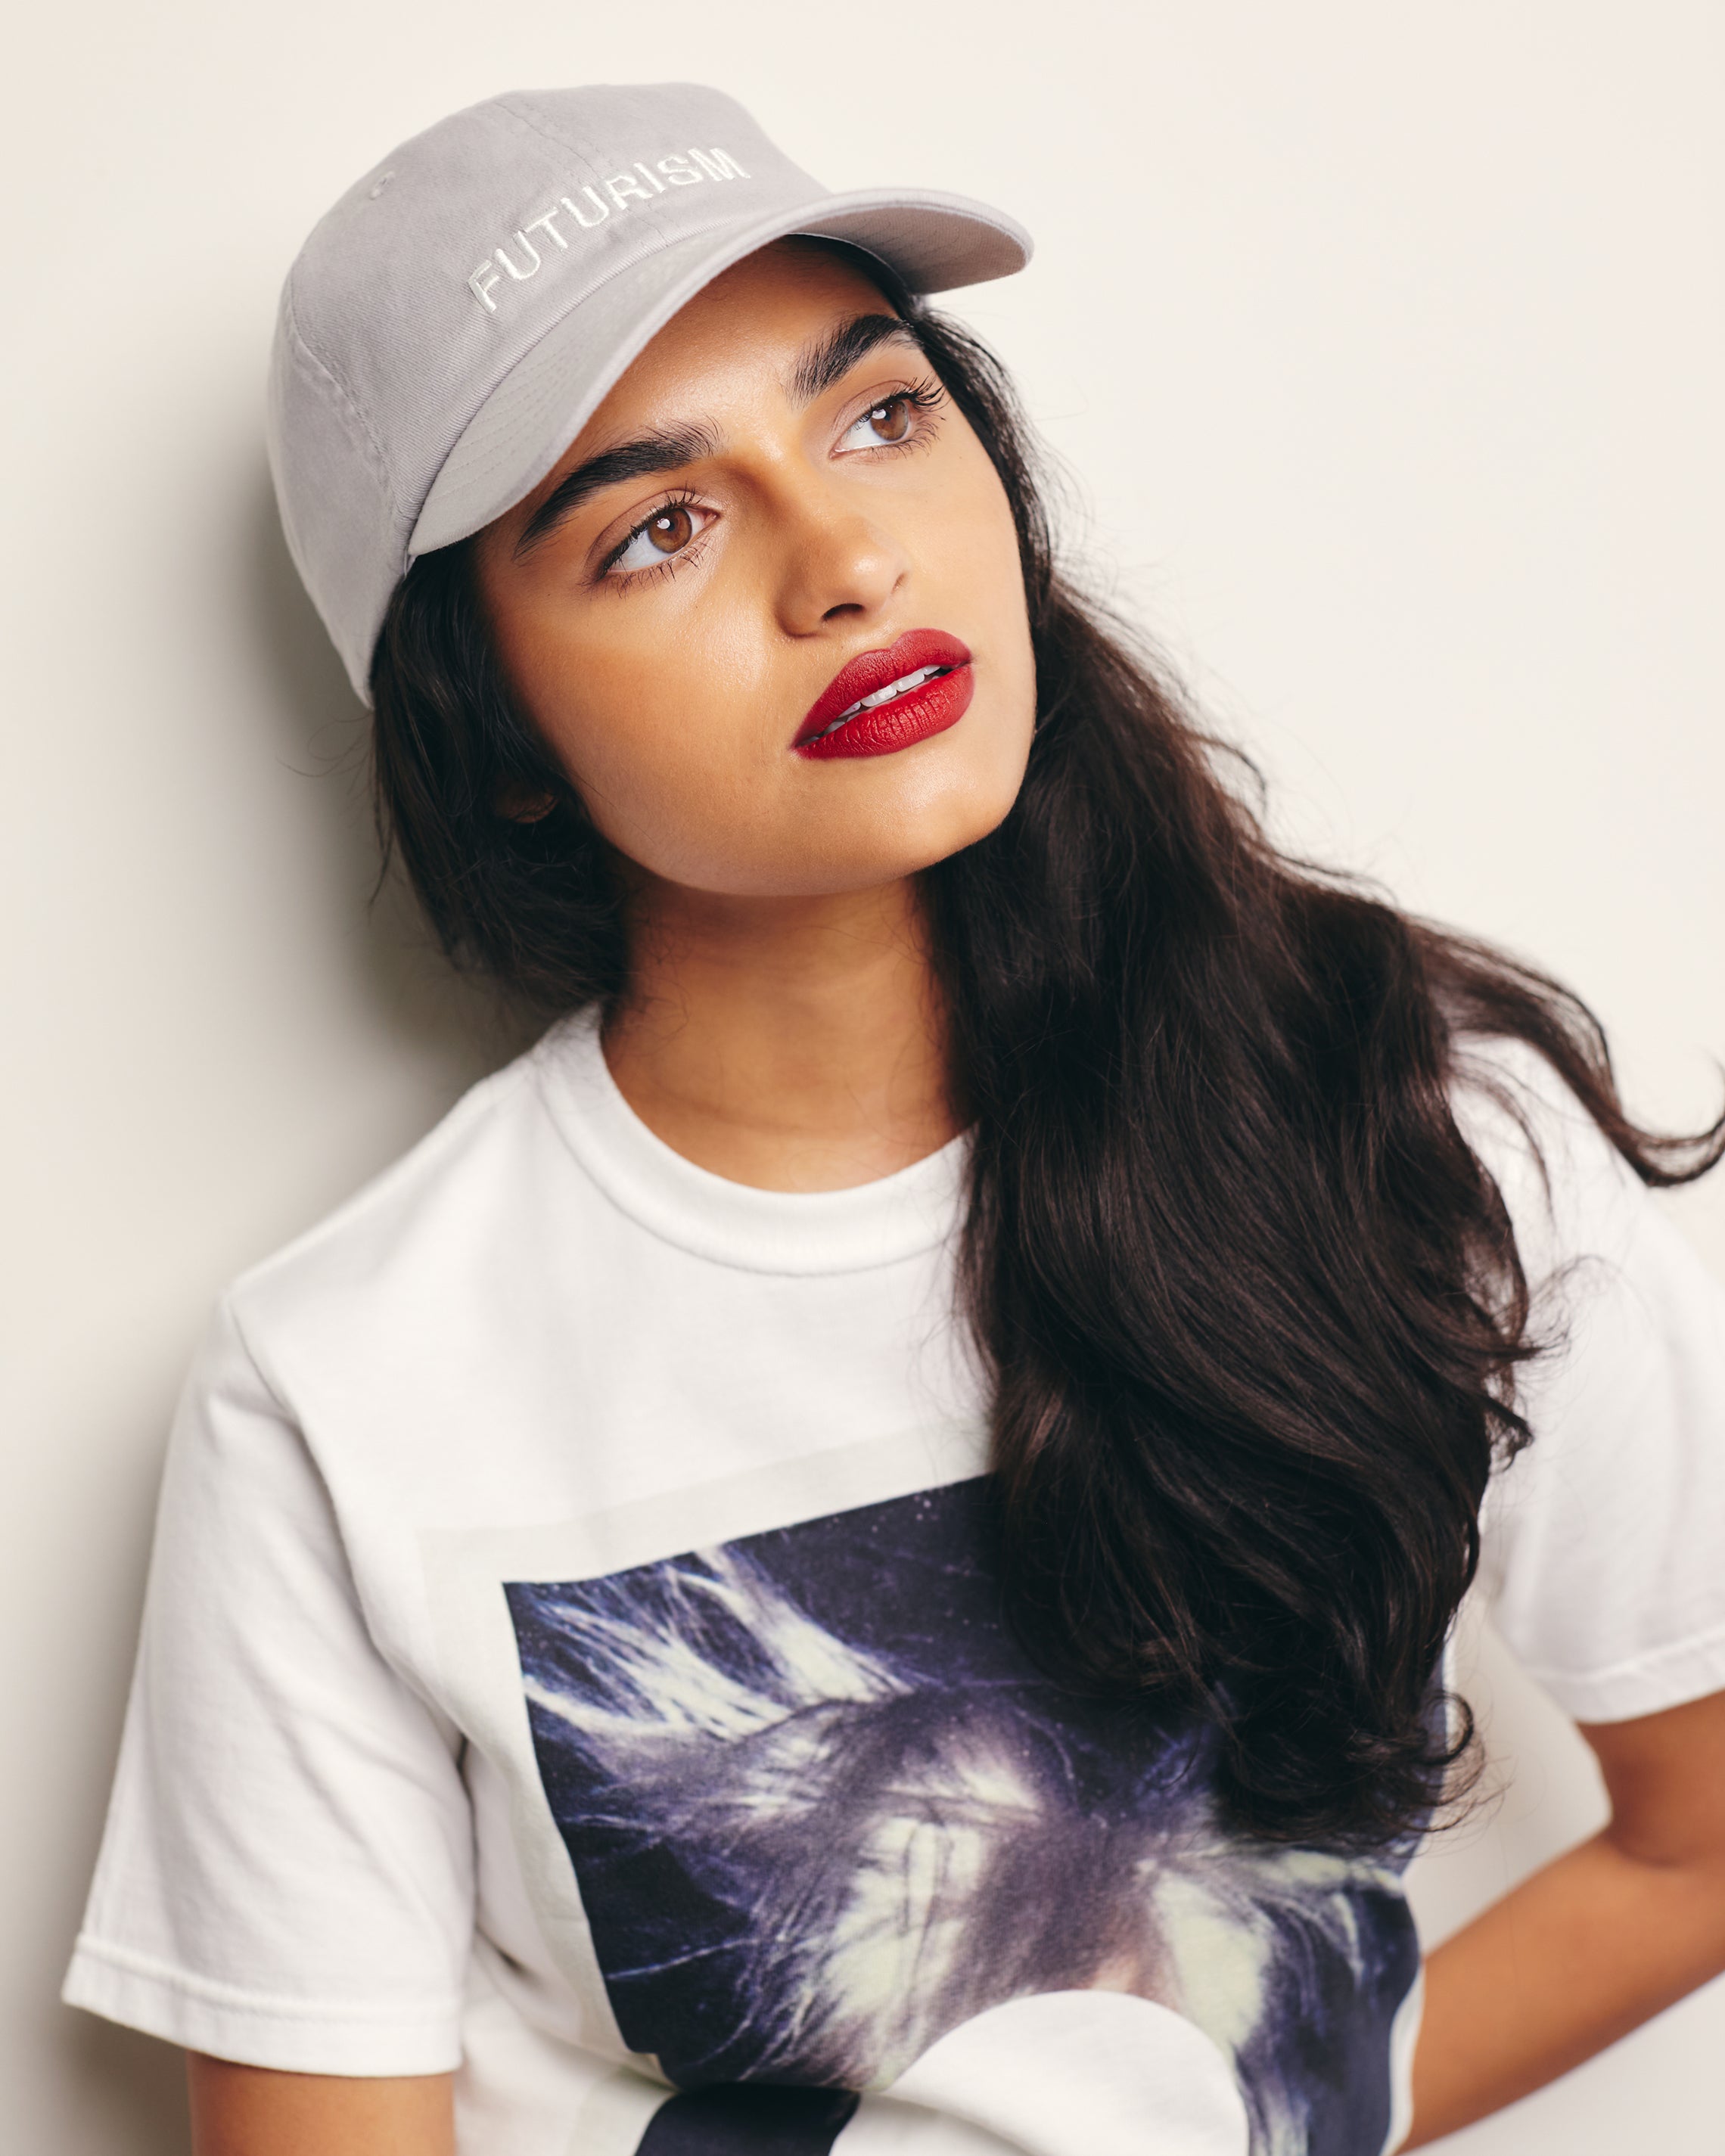 Mira Bhat wears Futurism Gray Baseball Cap / Dad Hat with Futurism Art Movement Text Embroidery on Front. 100% Cotton.